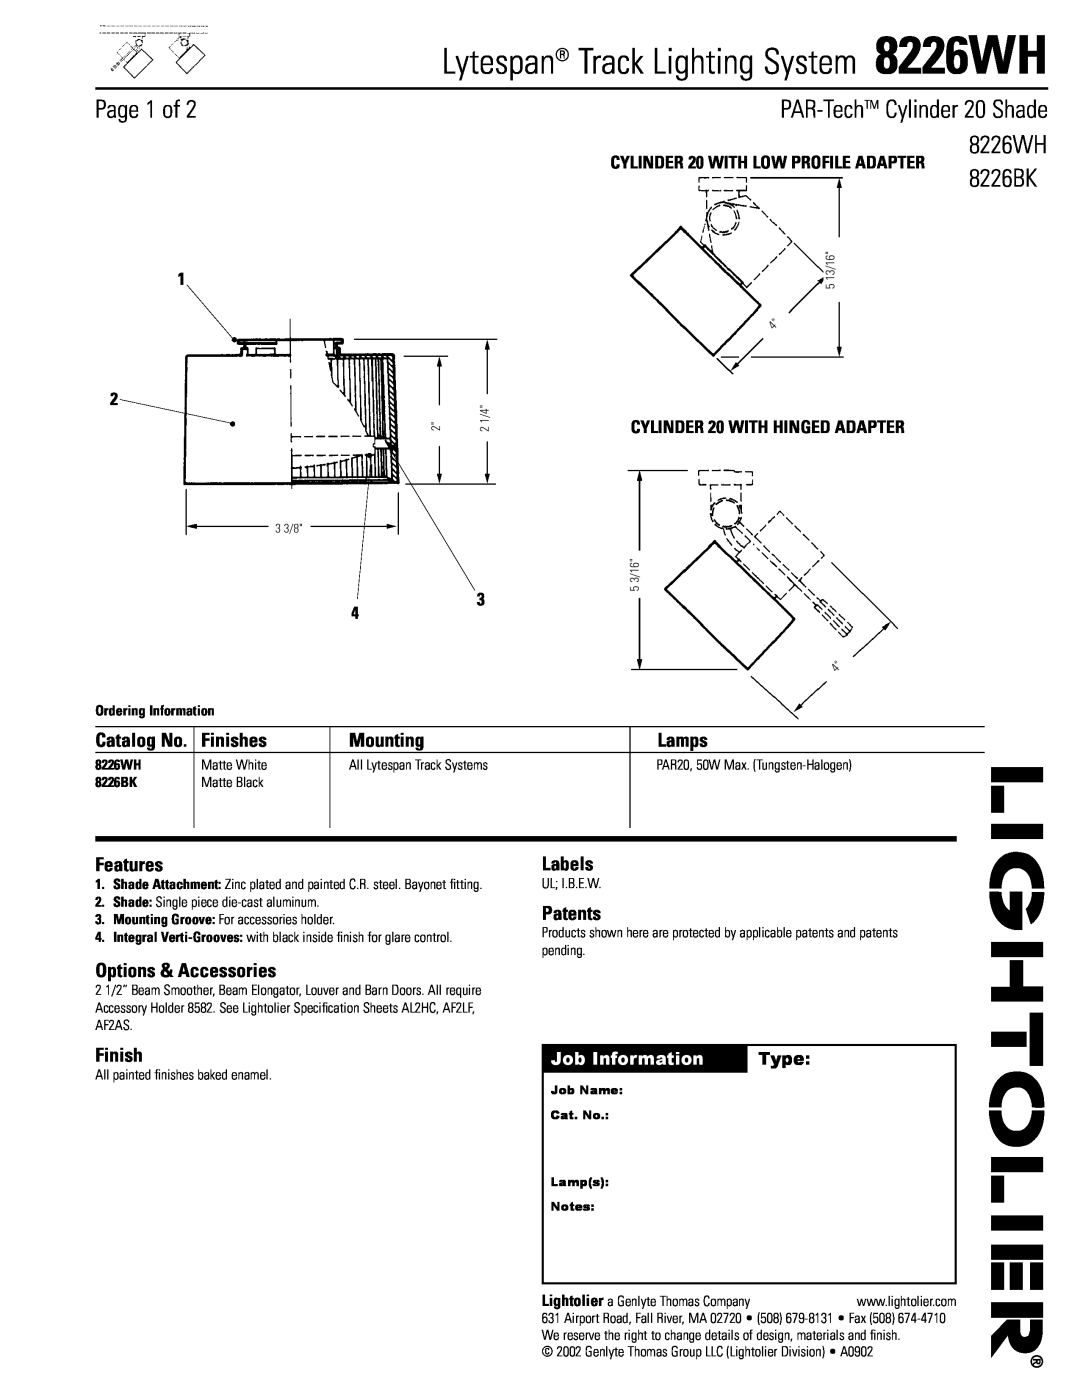 Lightolier specifications Lytespan Track Lighting System 8226WH, Page 1 of, 8226BK, Finishes, Mounting, Features, Lamps 